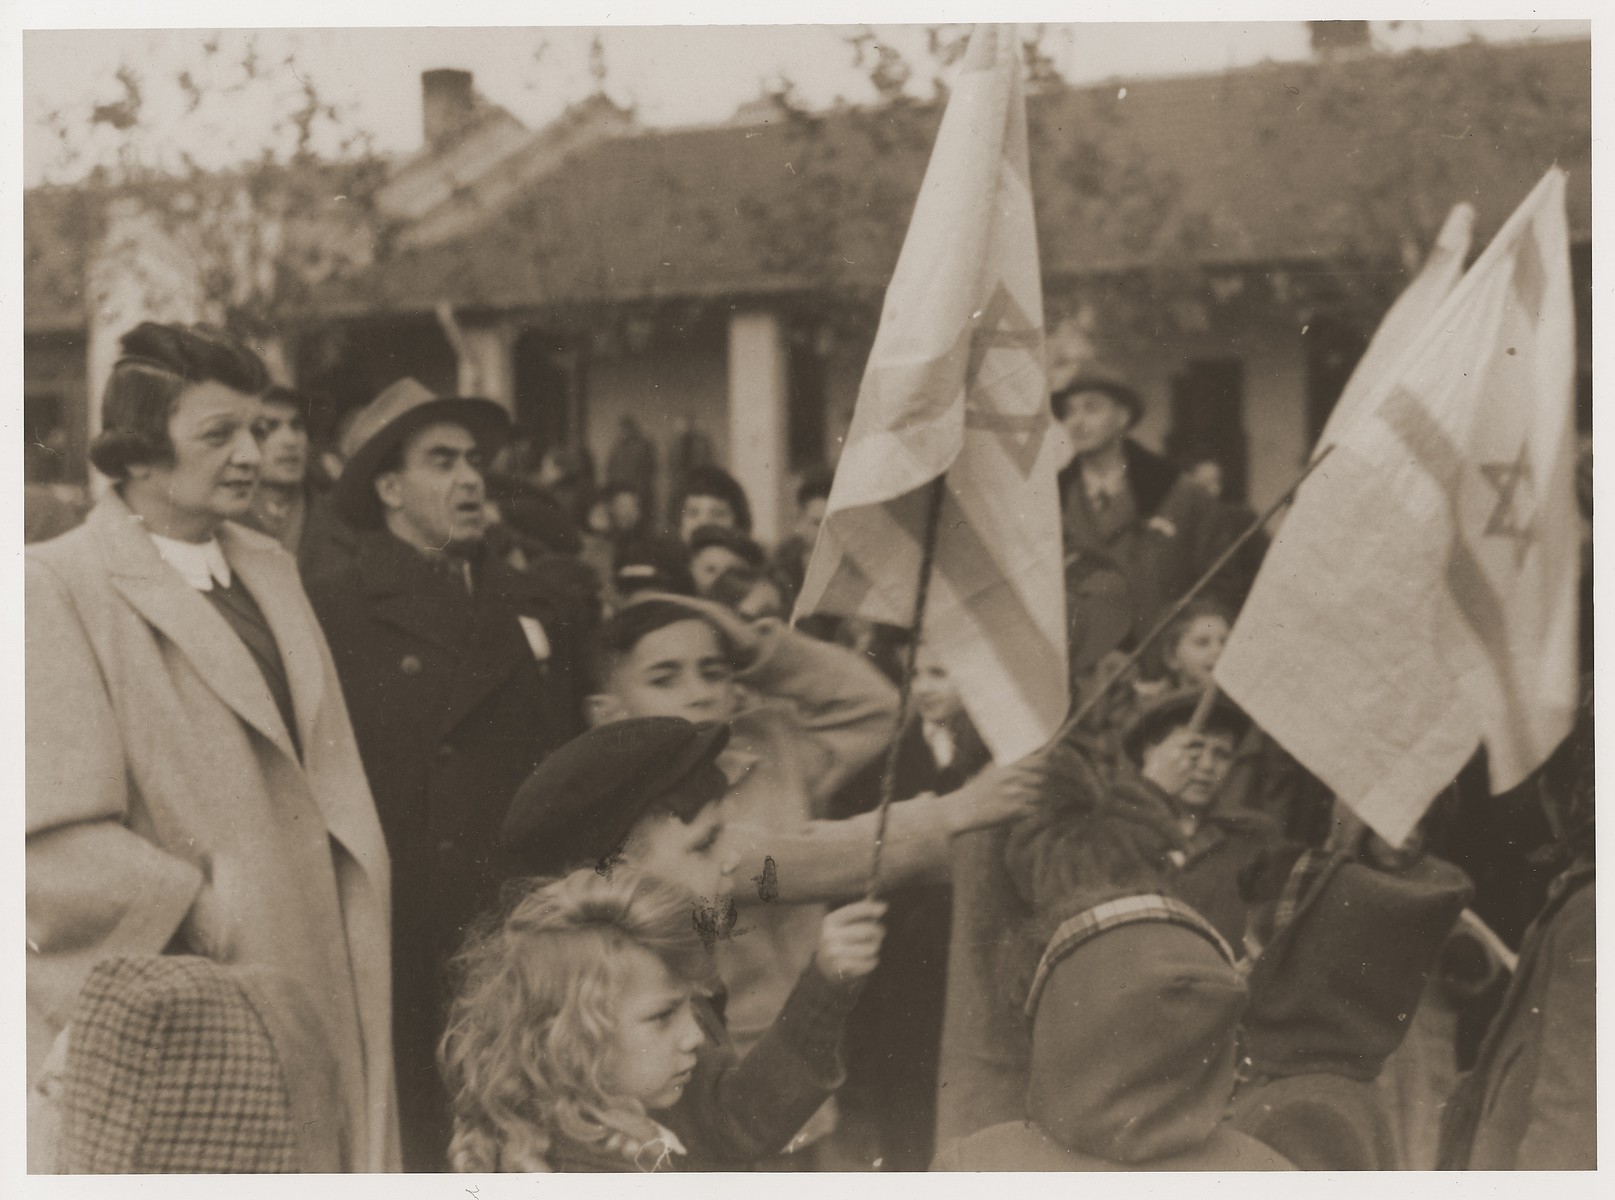 Harry Fiedler and other students wave Zionist flags during a celebration at the Kadoorie School.   

Standing on the far left is school principal, Lucie Hartwich.